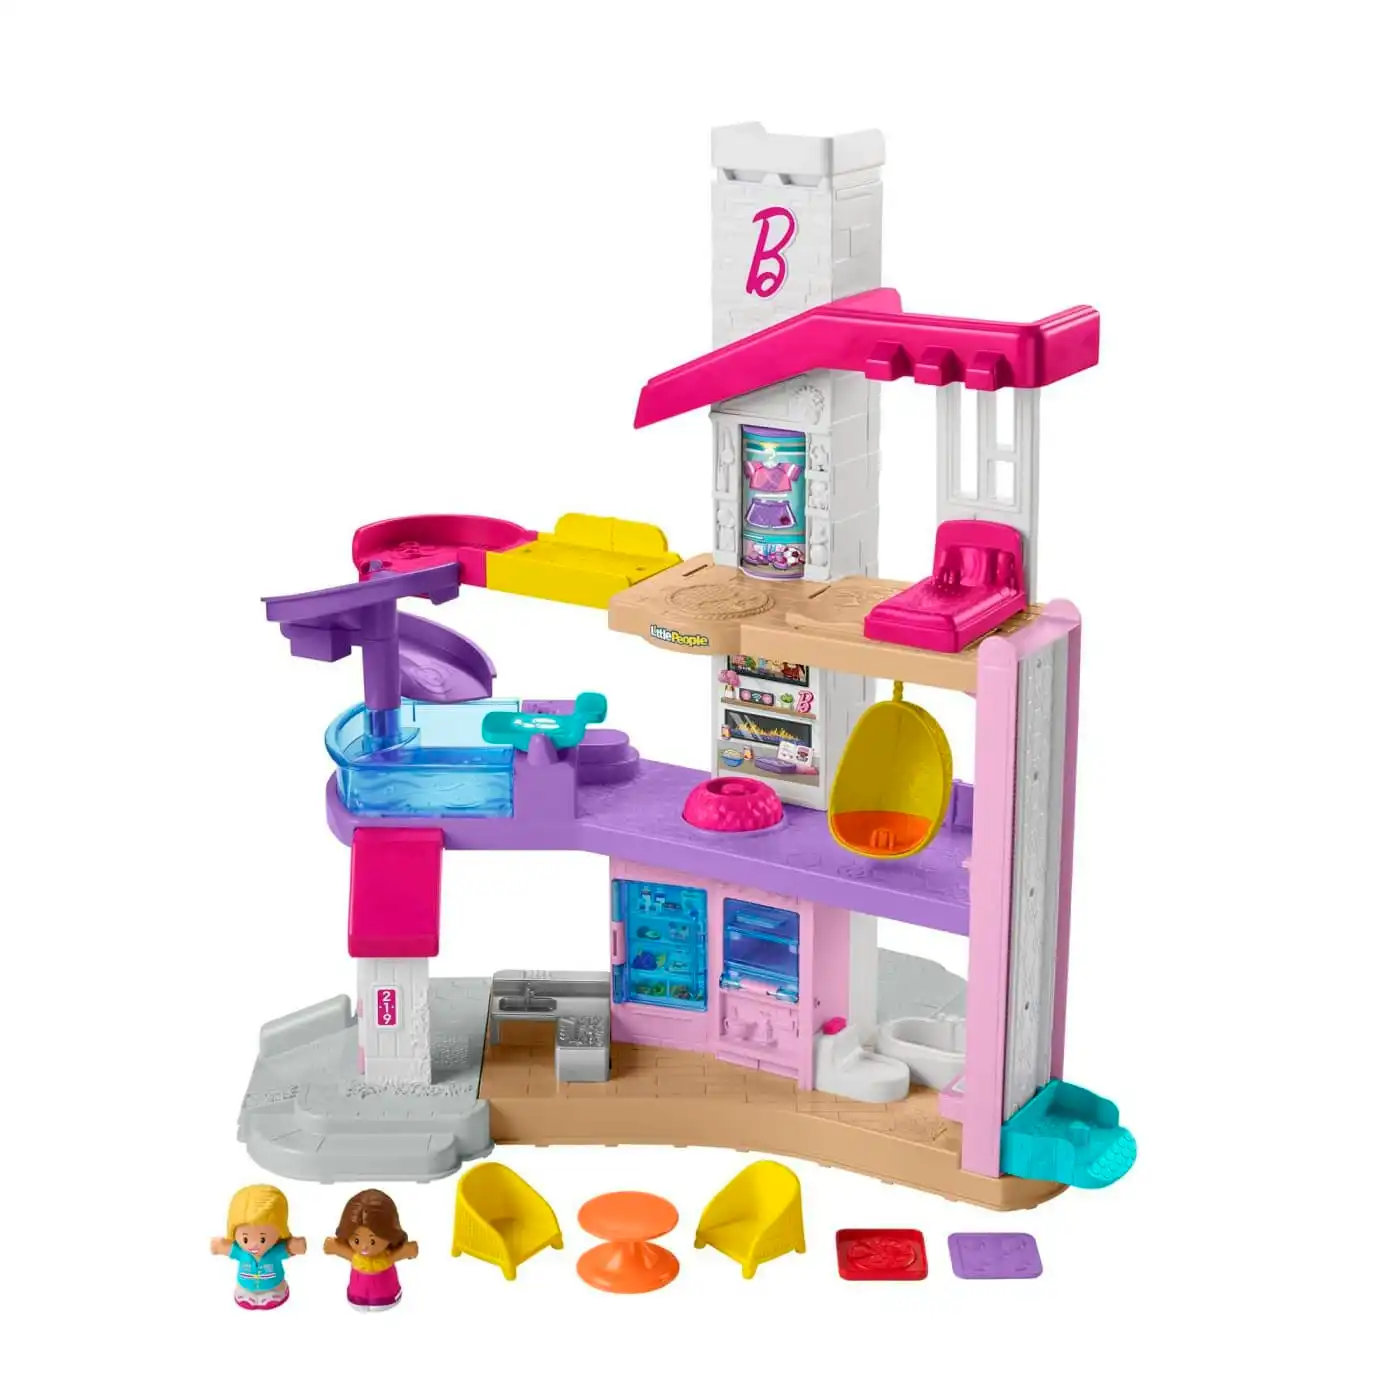 Barbie Little Dreamhouse Interactive Playset By Little People